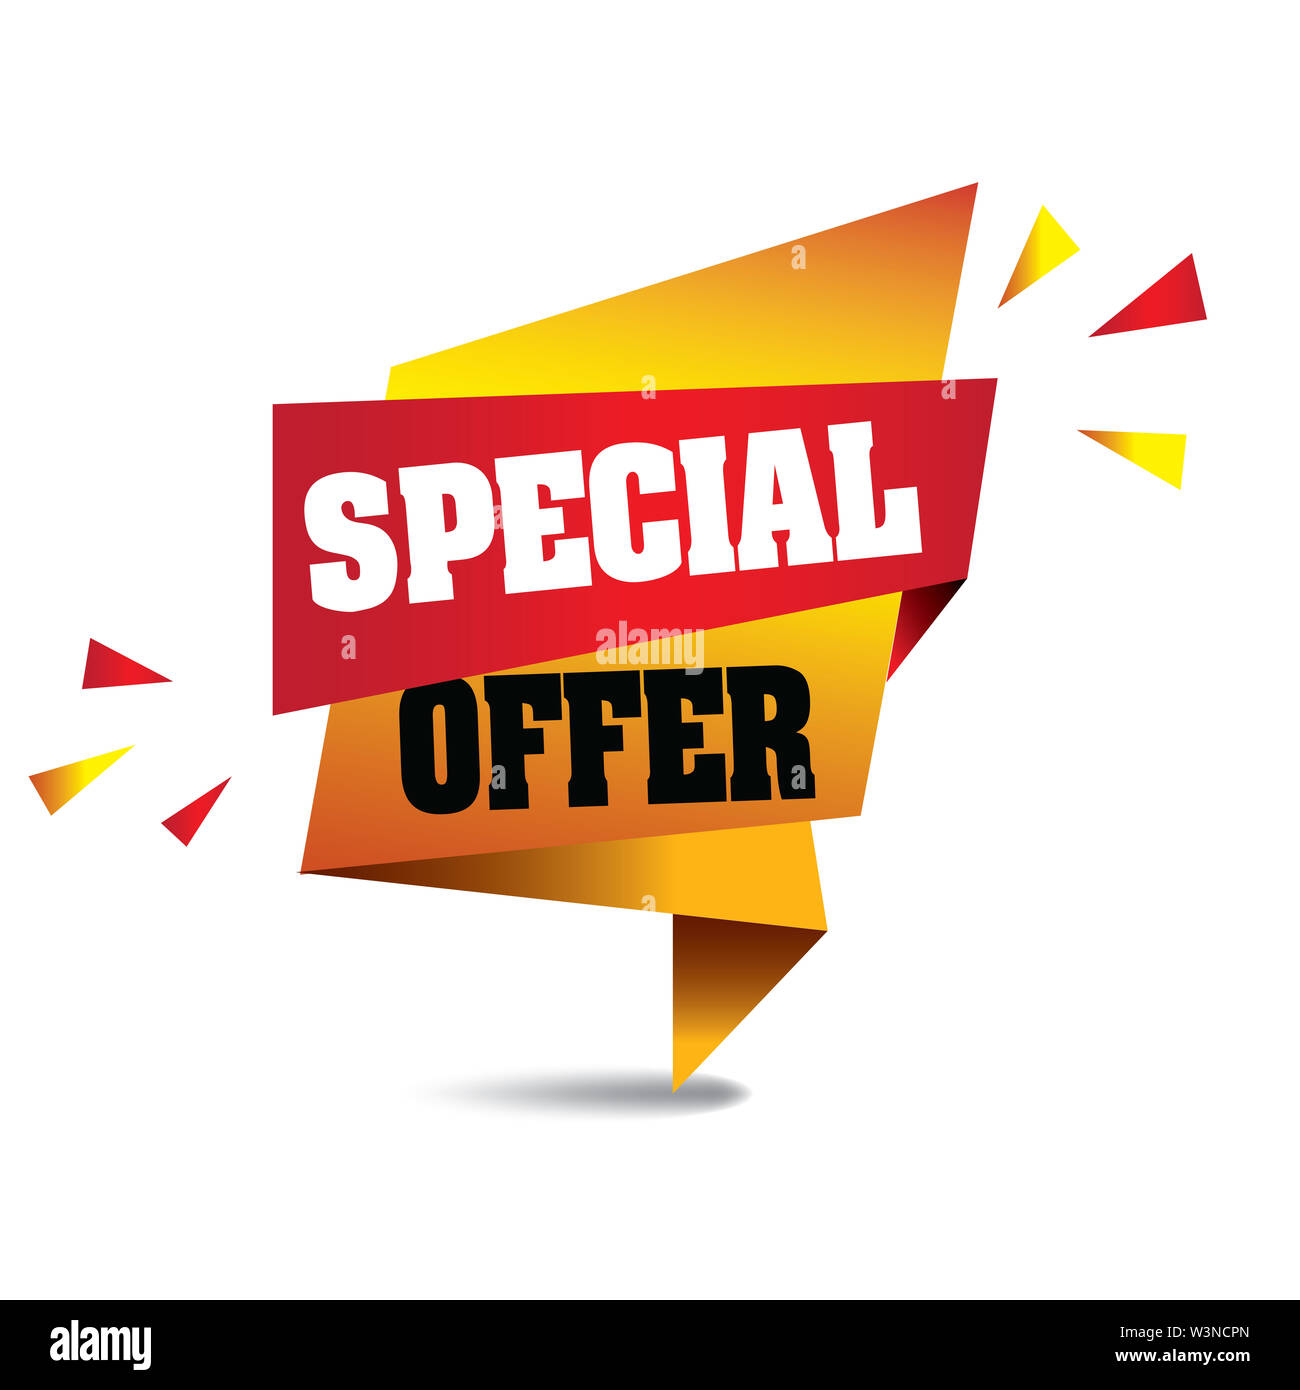 Special Offer Banner vector format Stock Photo